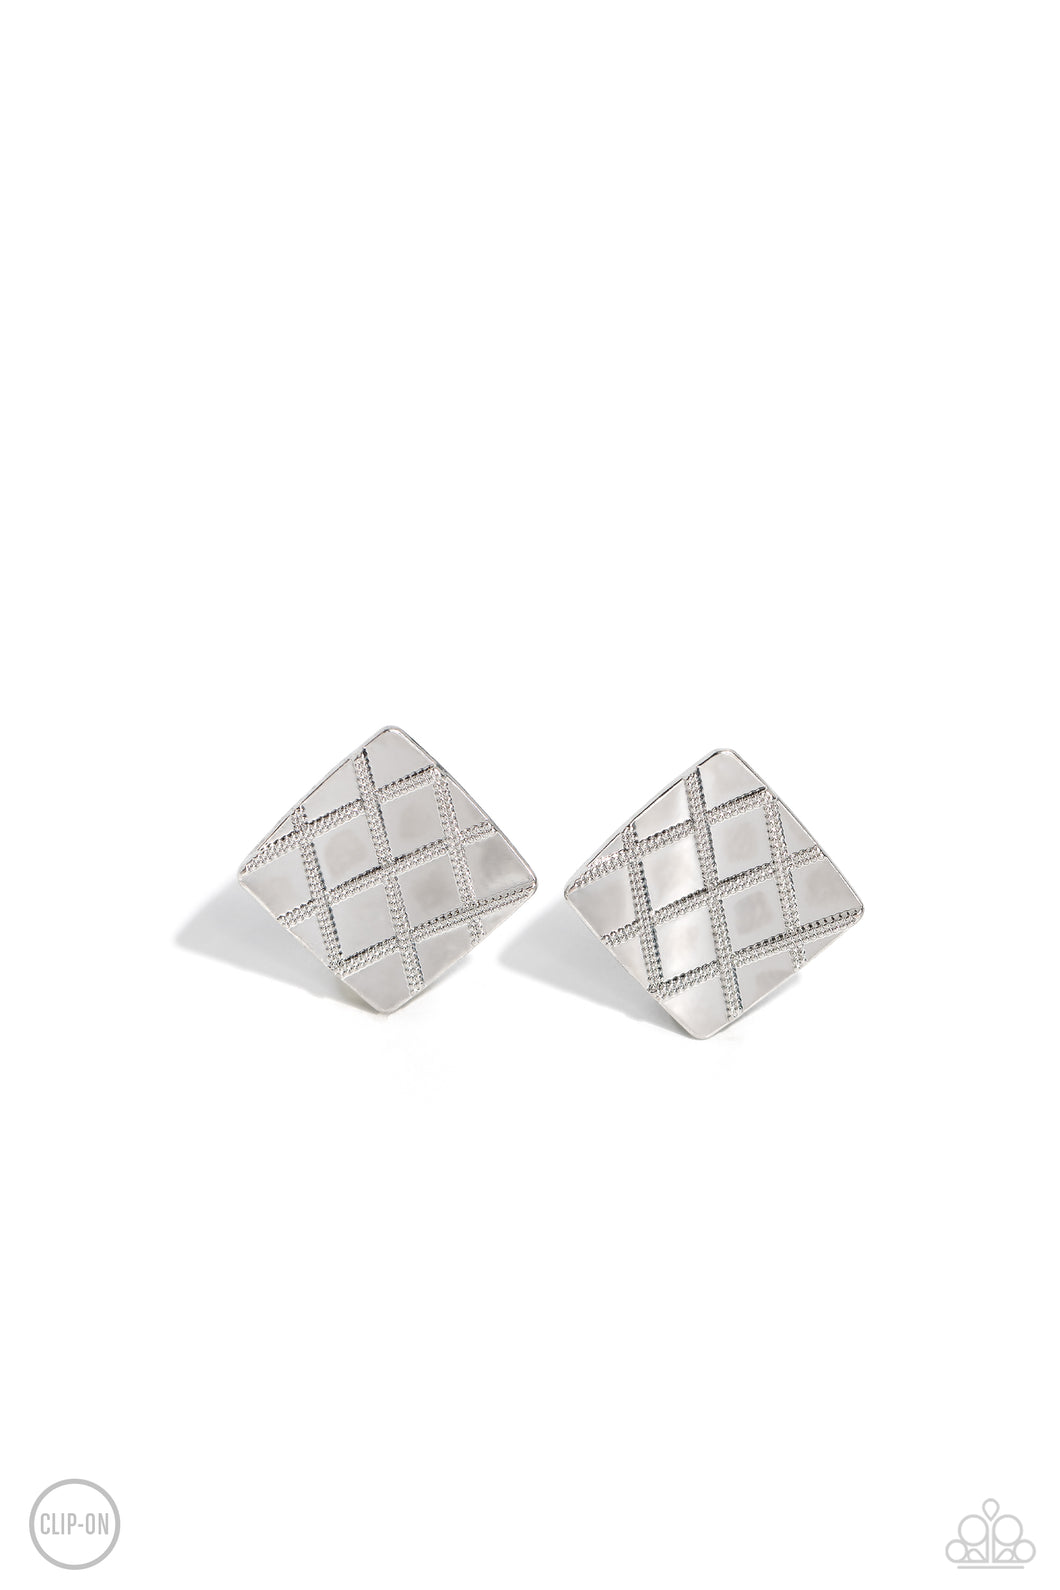 PLAID and Simple - Silver (Clip-On) Earrings